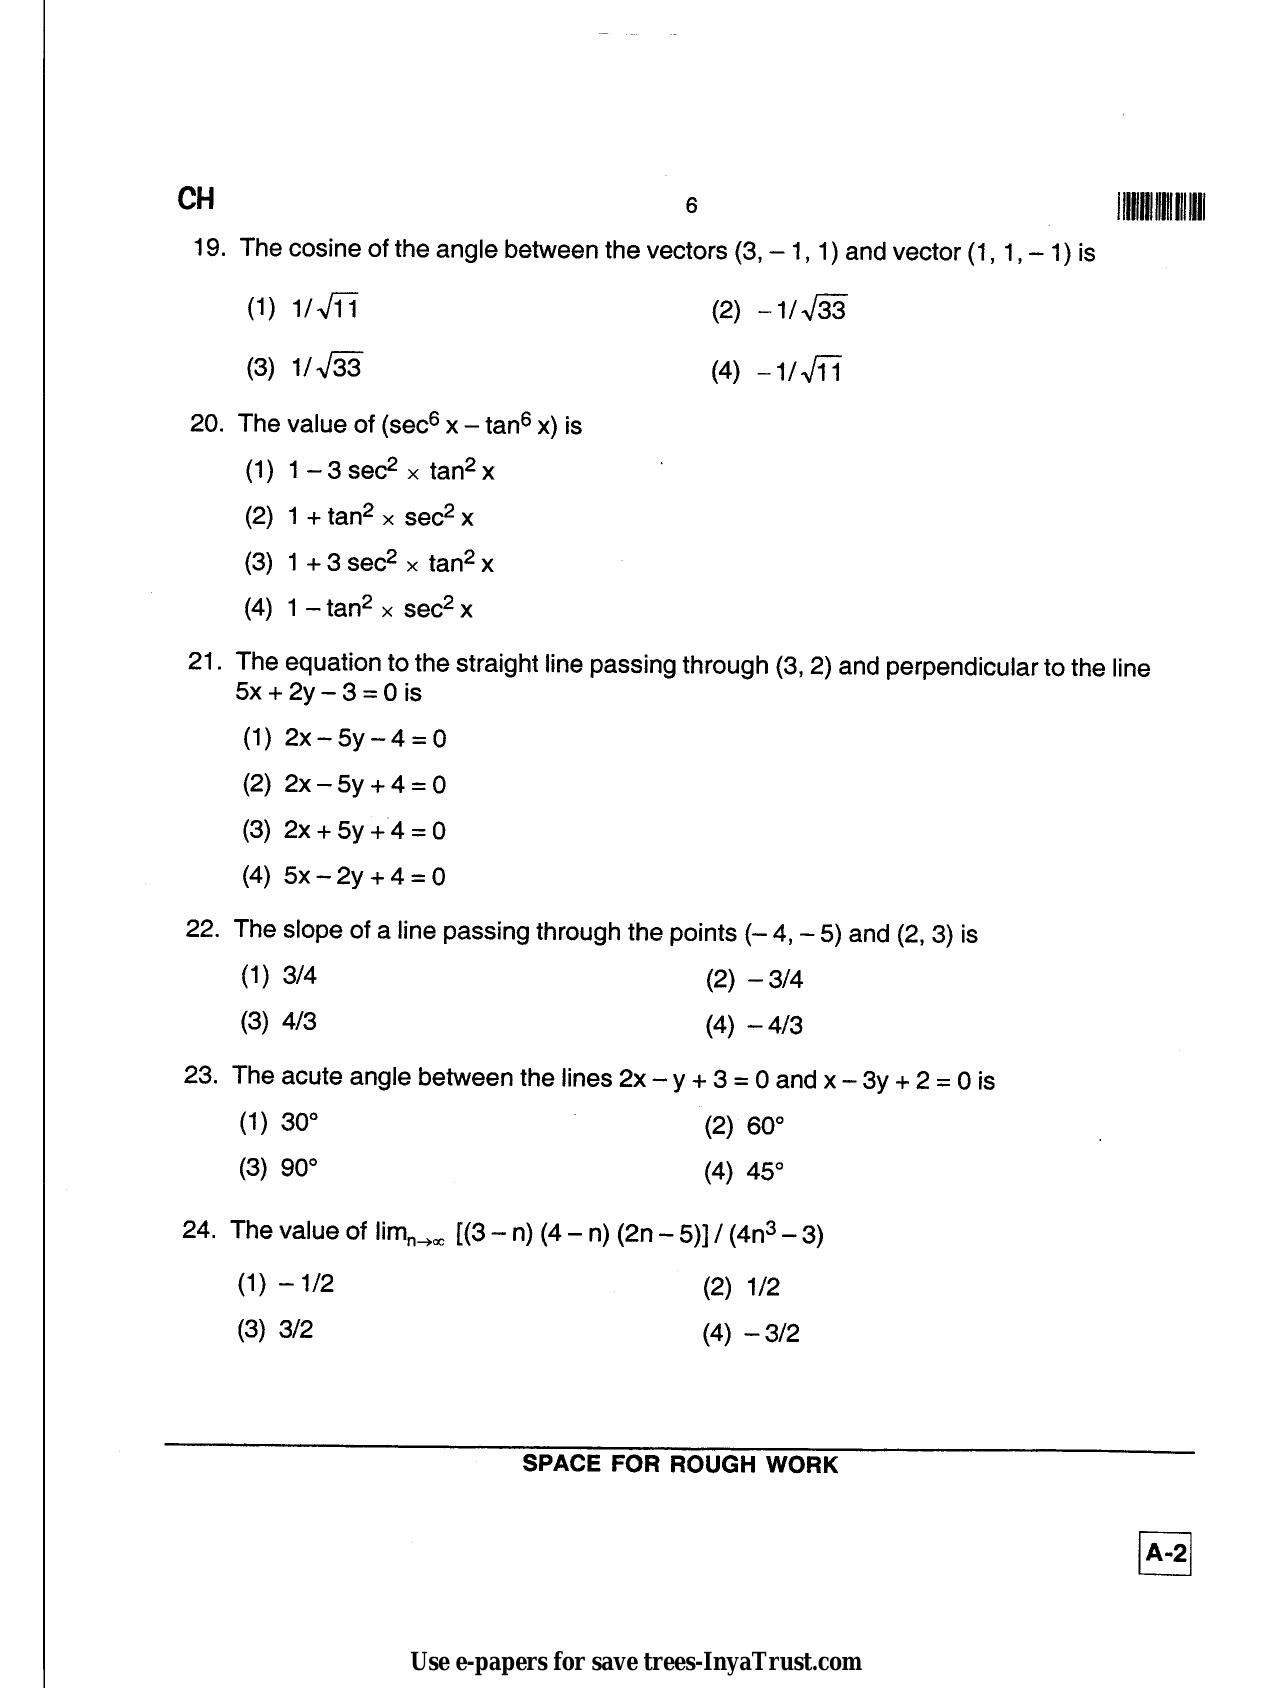 Karnataka Diploma CET- 2013 Chemical Engineering / Polymer Technology Question Paper - Page 6